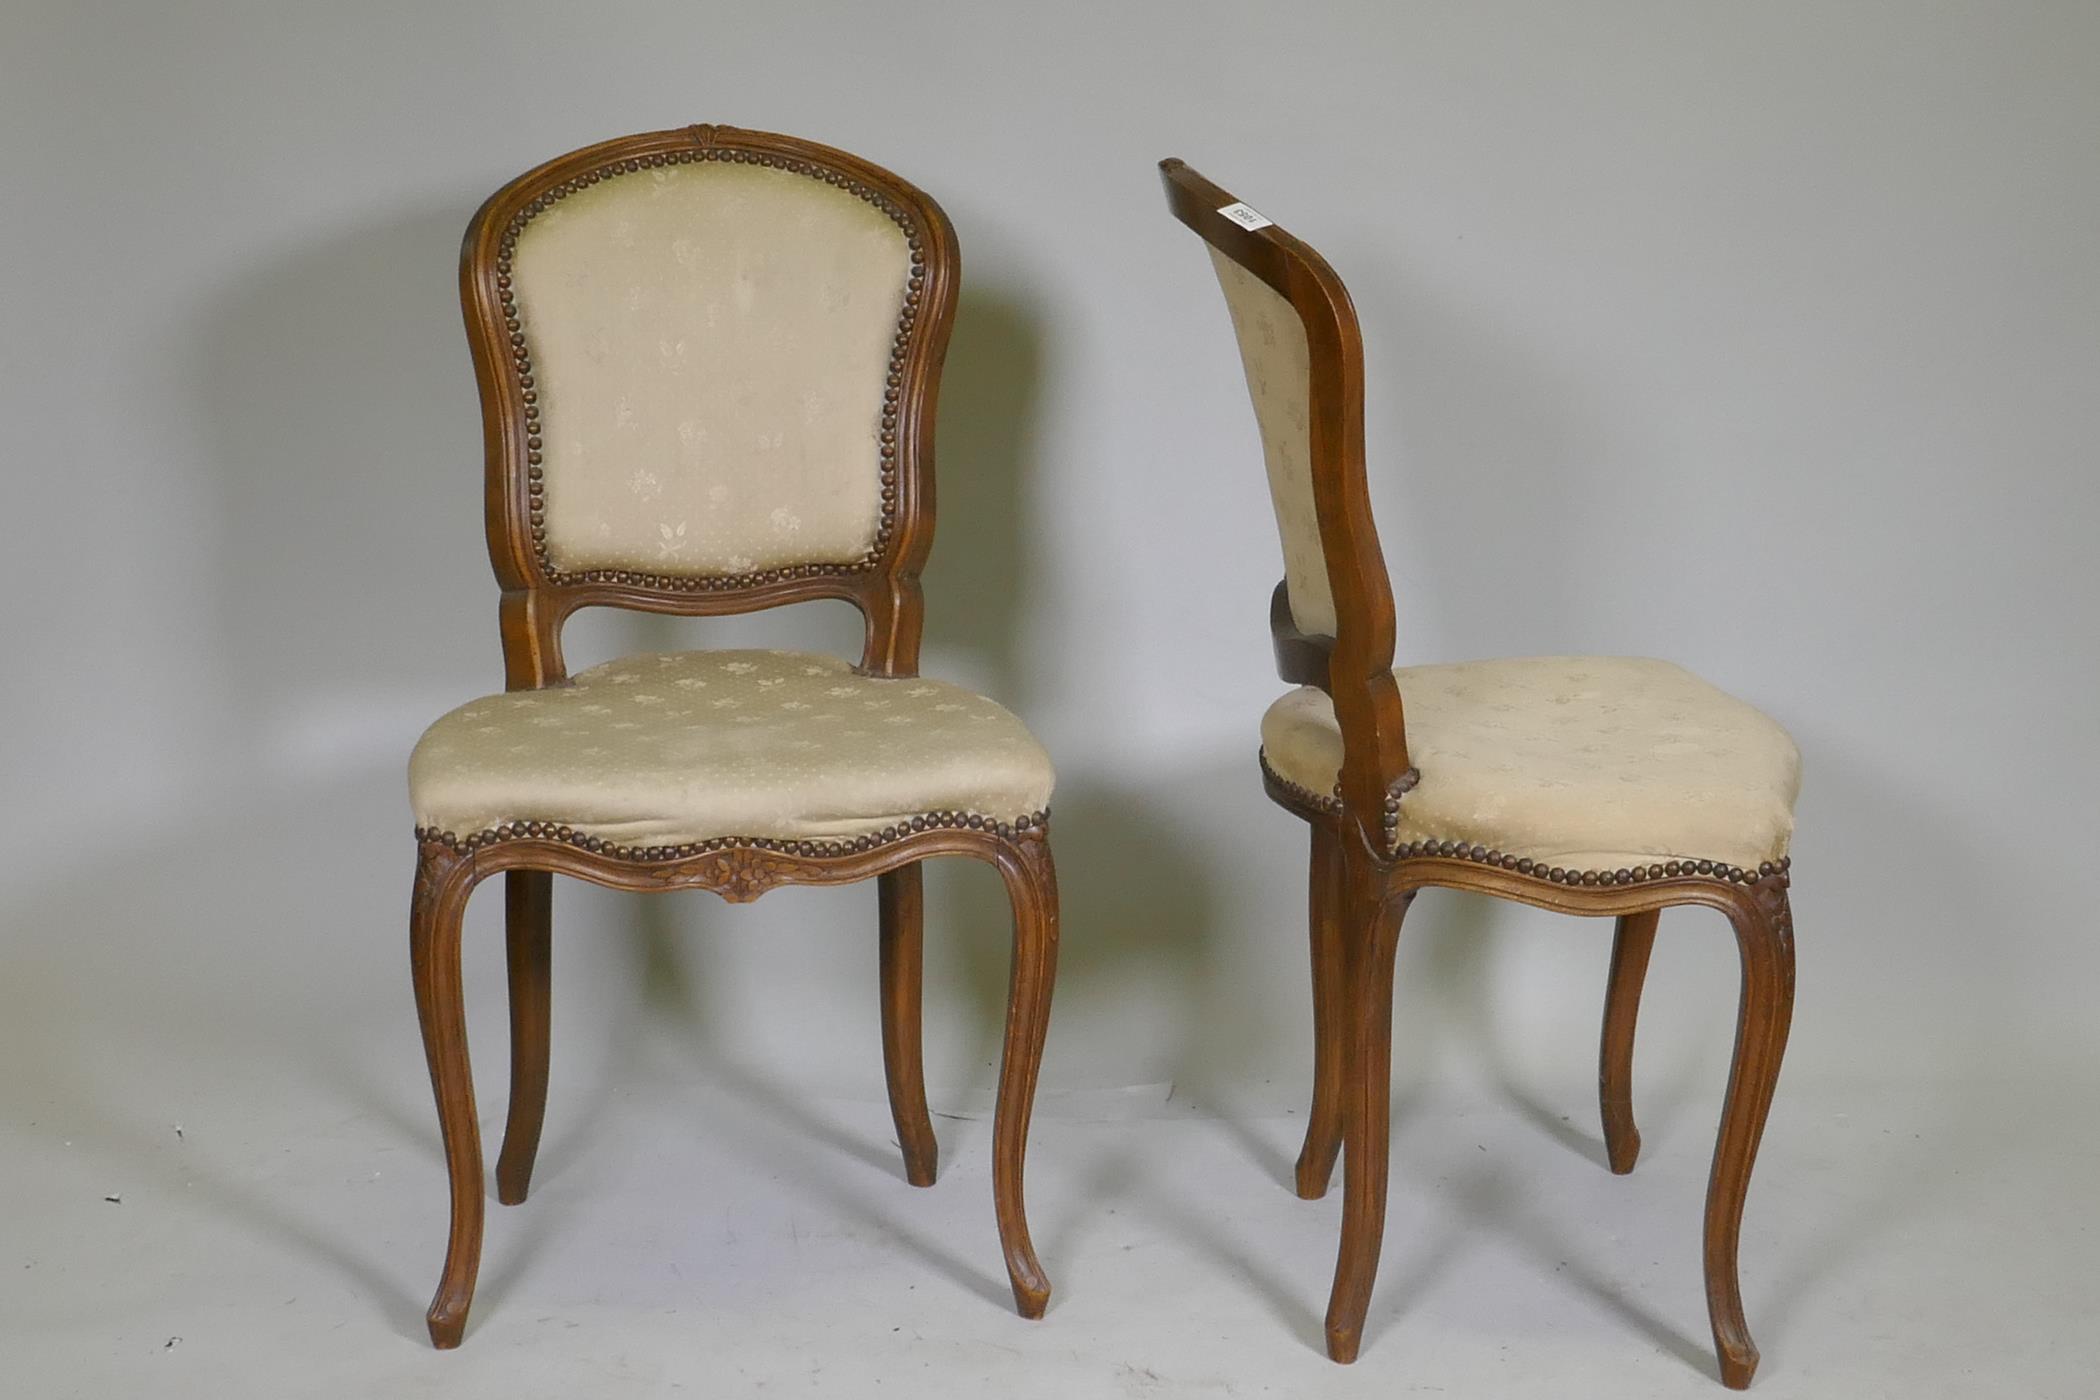 A pair of C19th French beechwood side chairs with carved decoration and brass stud detail - Image 3 of 3